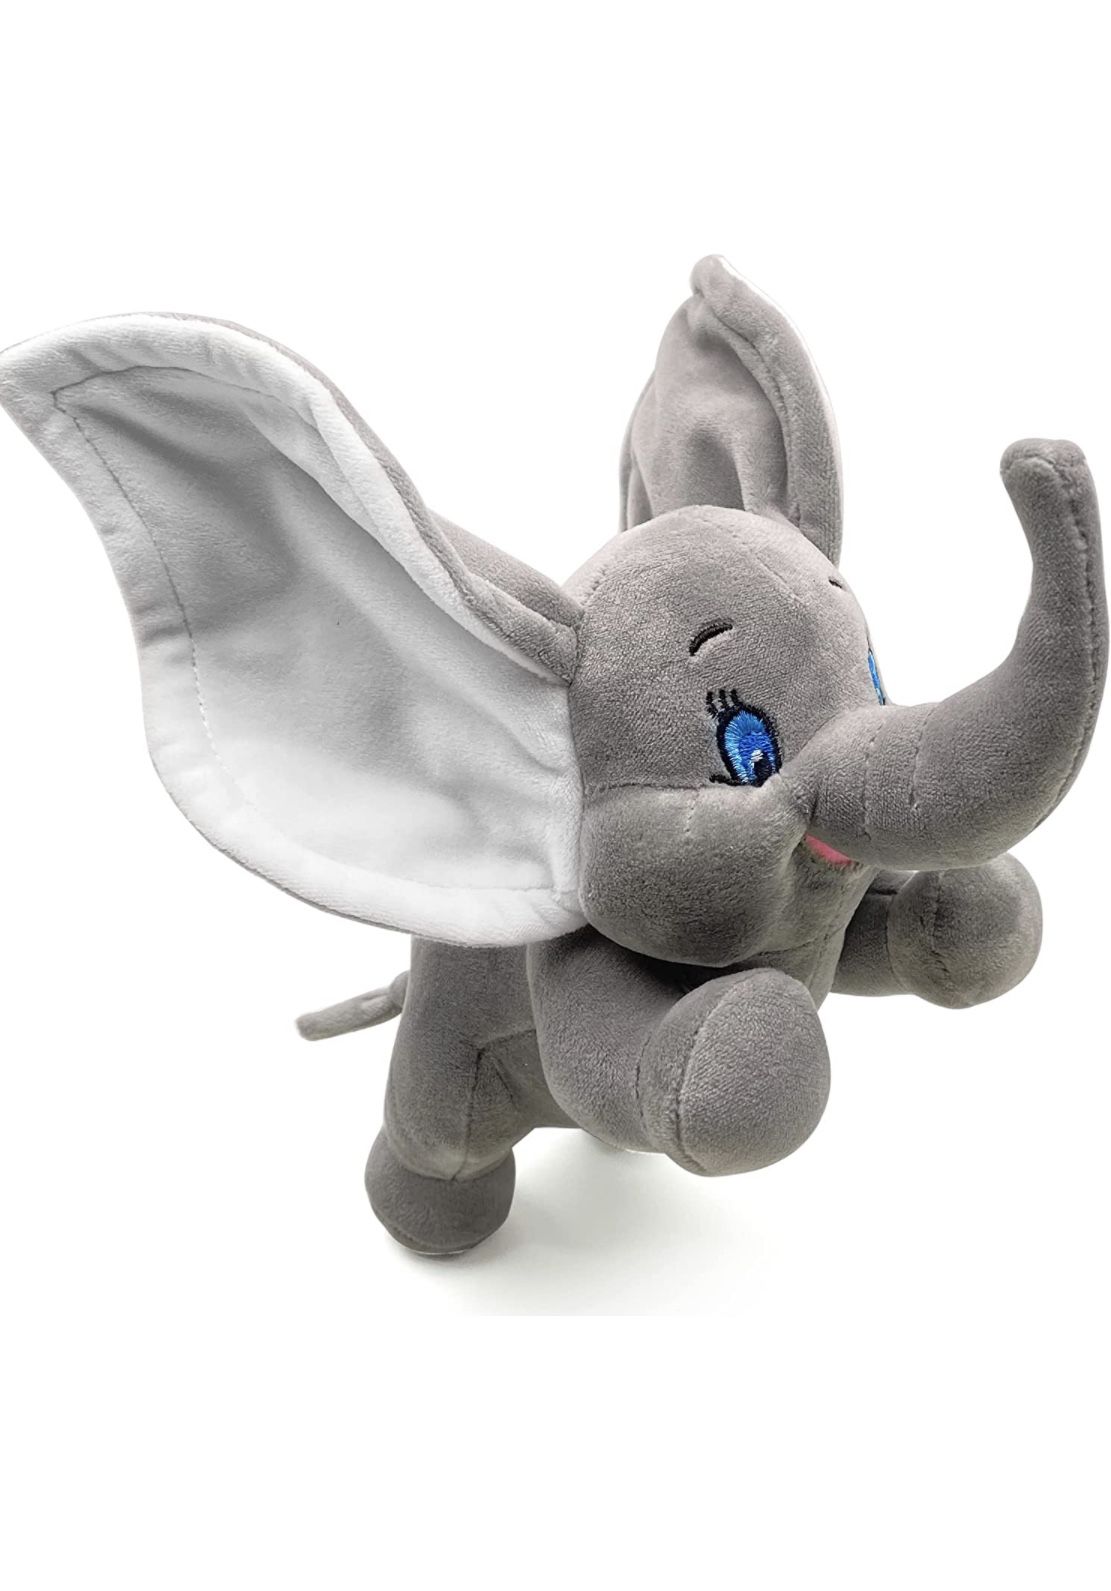 Dumbo The Flying Elephant By Homily as A plush Elephant